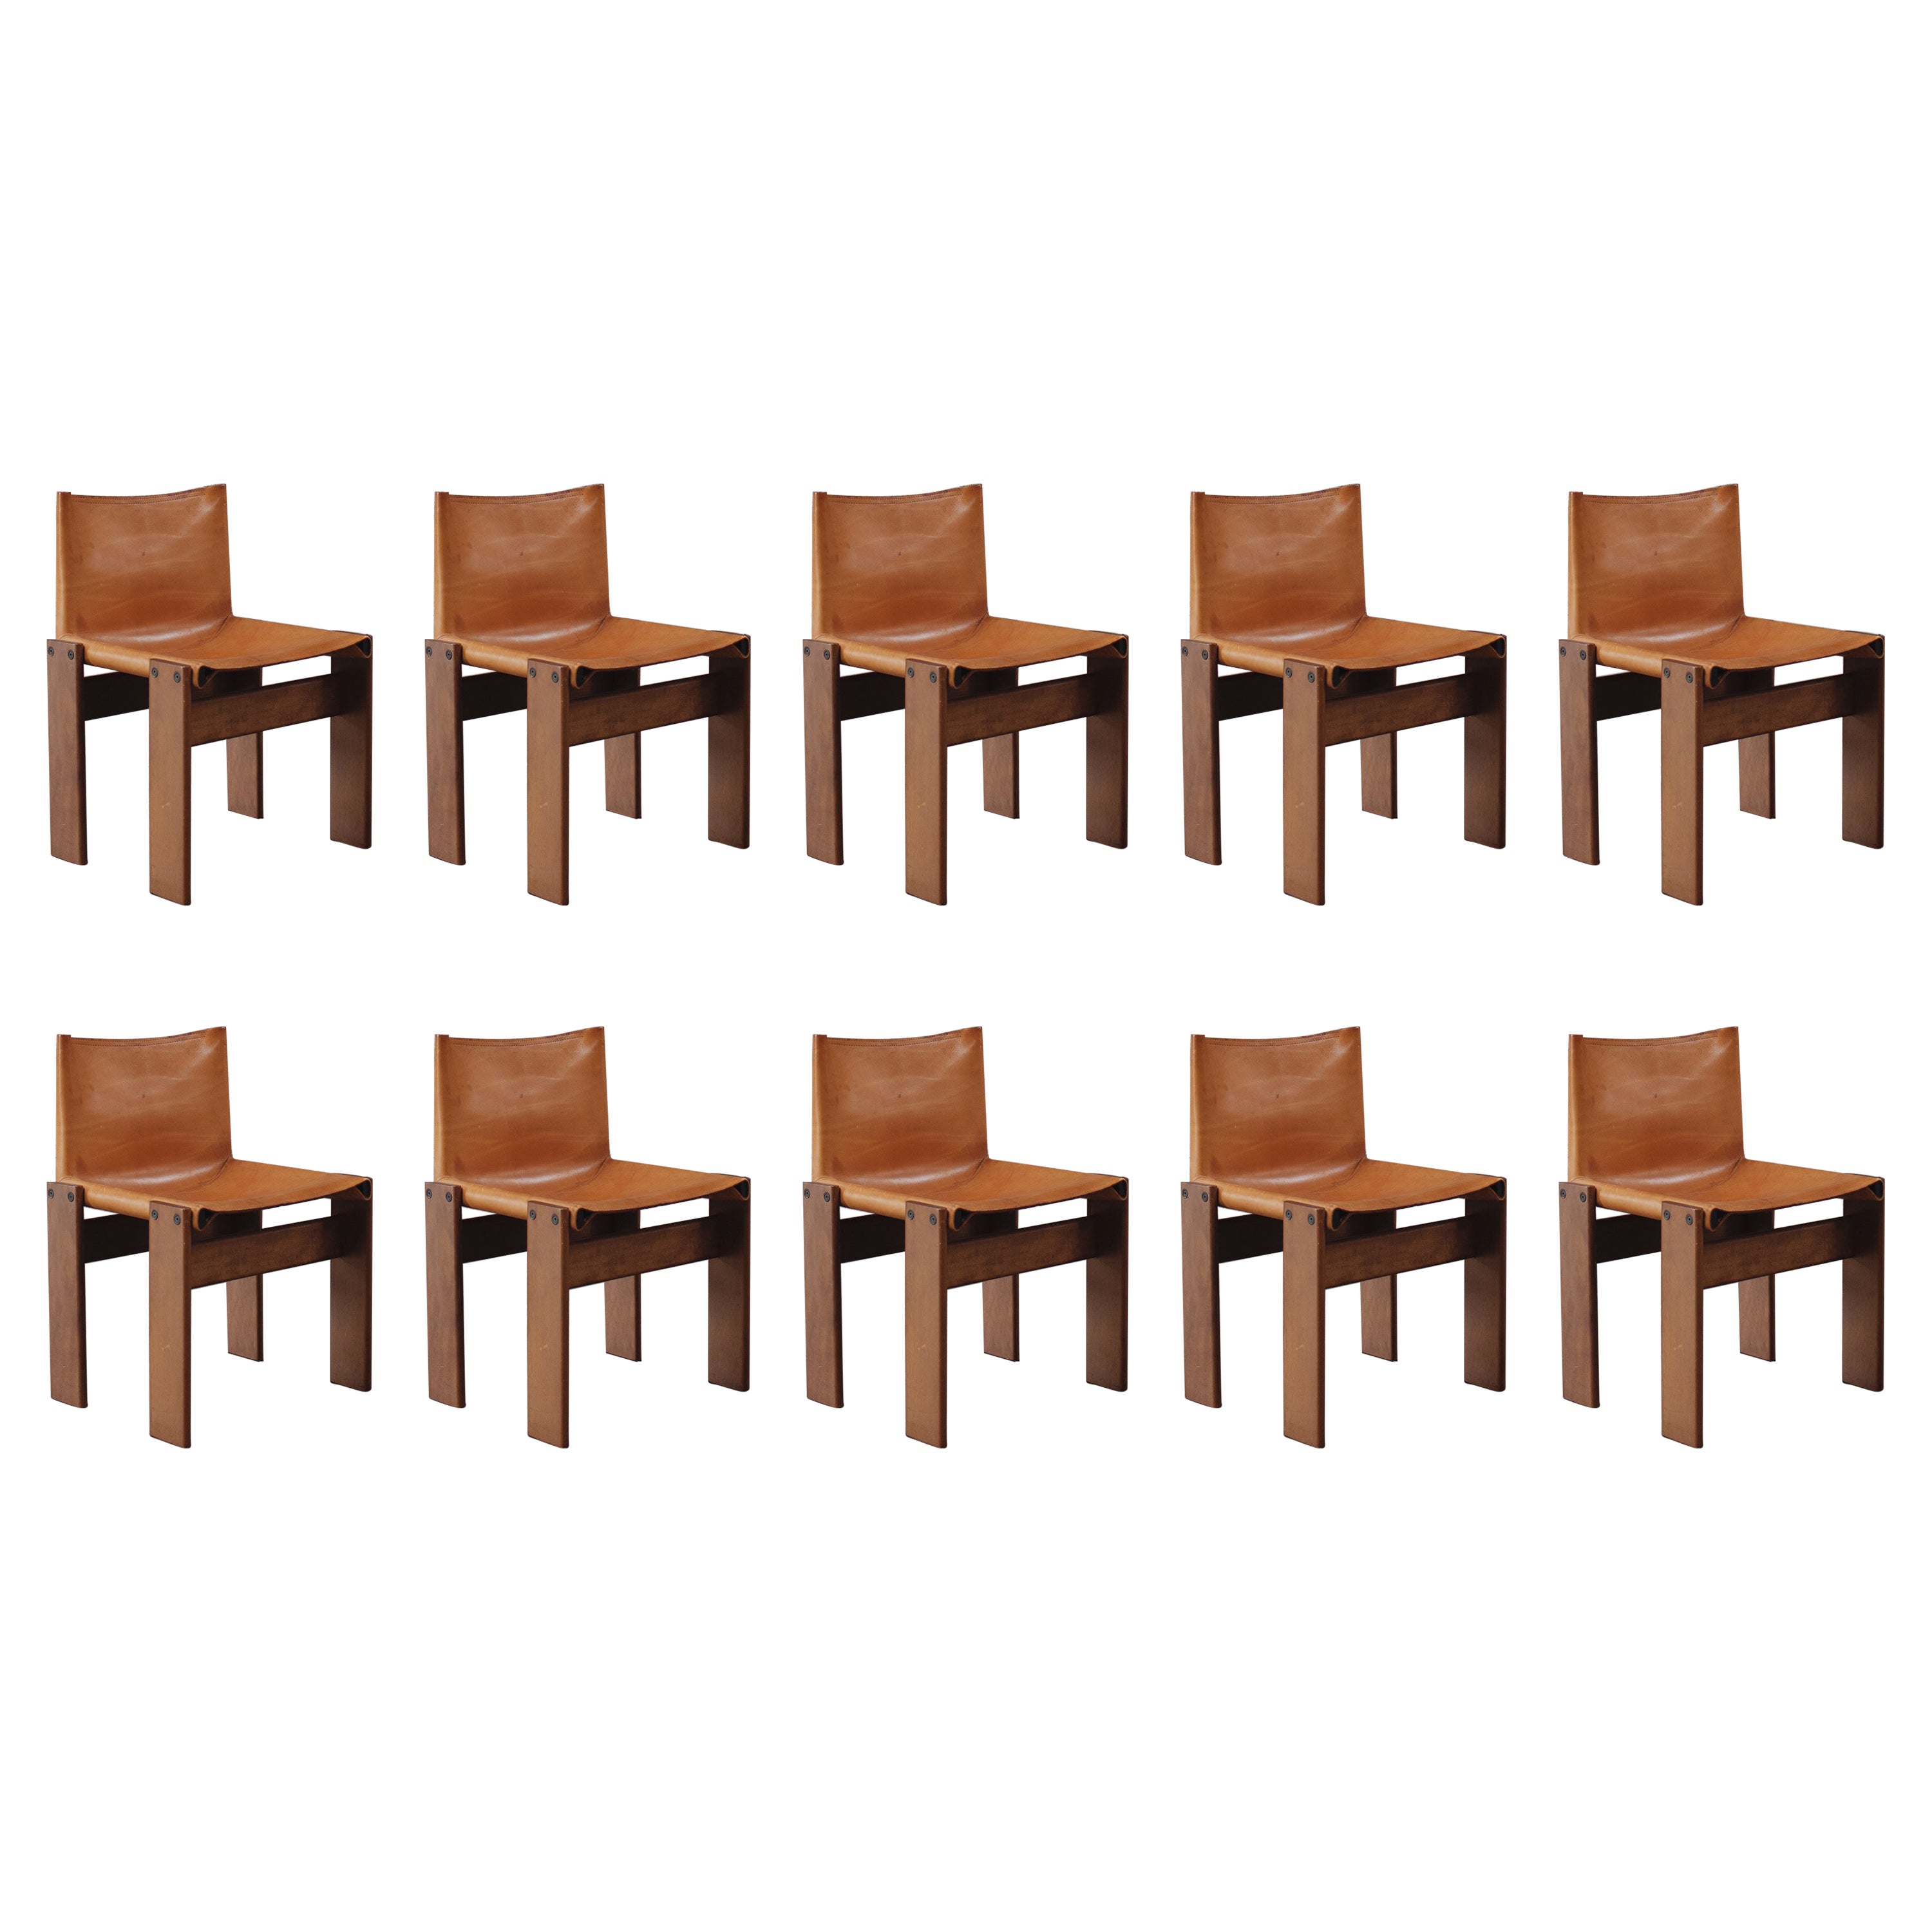 Afra & Tobia Scarpa "Monk" Chairs for Molteni in Cognac Leather, 1974, Set of 10